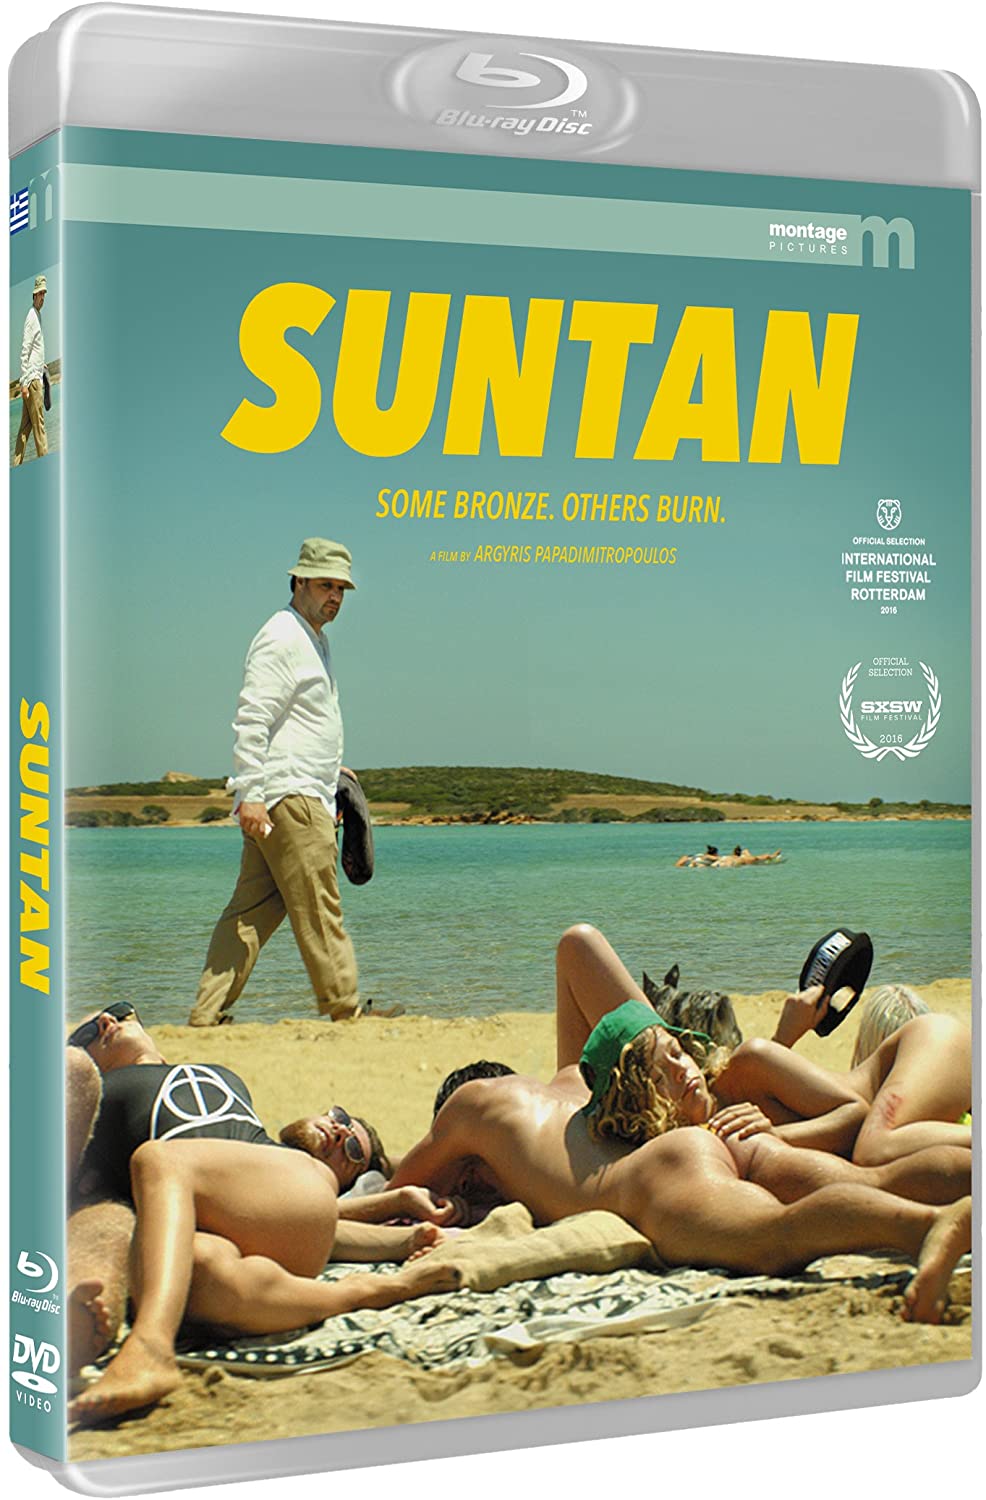 Suntan [Montage Pictures] Dual Format edition - Drama/Thriller [Blu-ray]